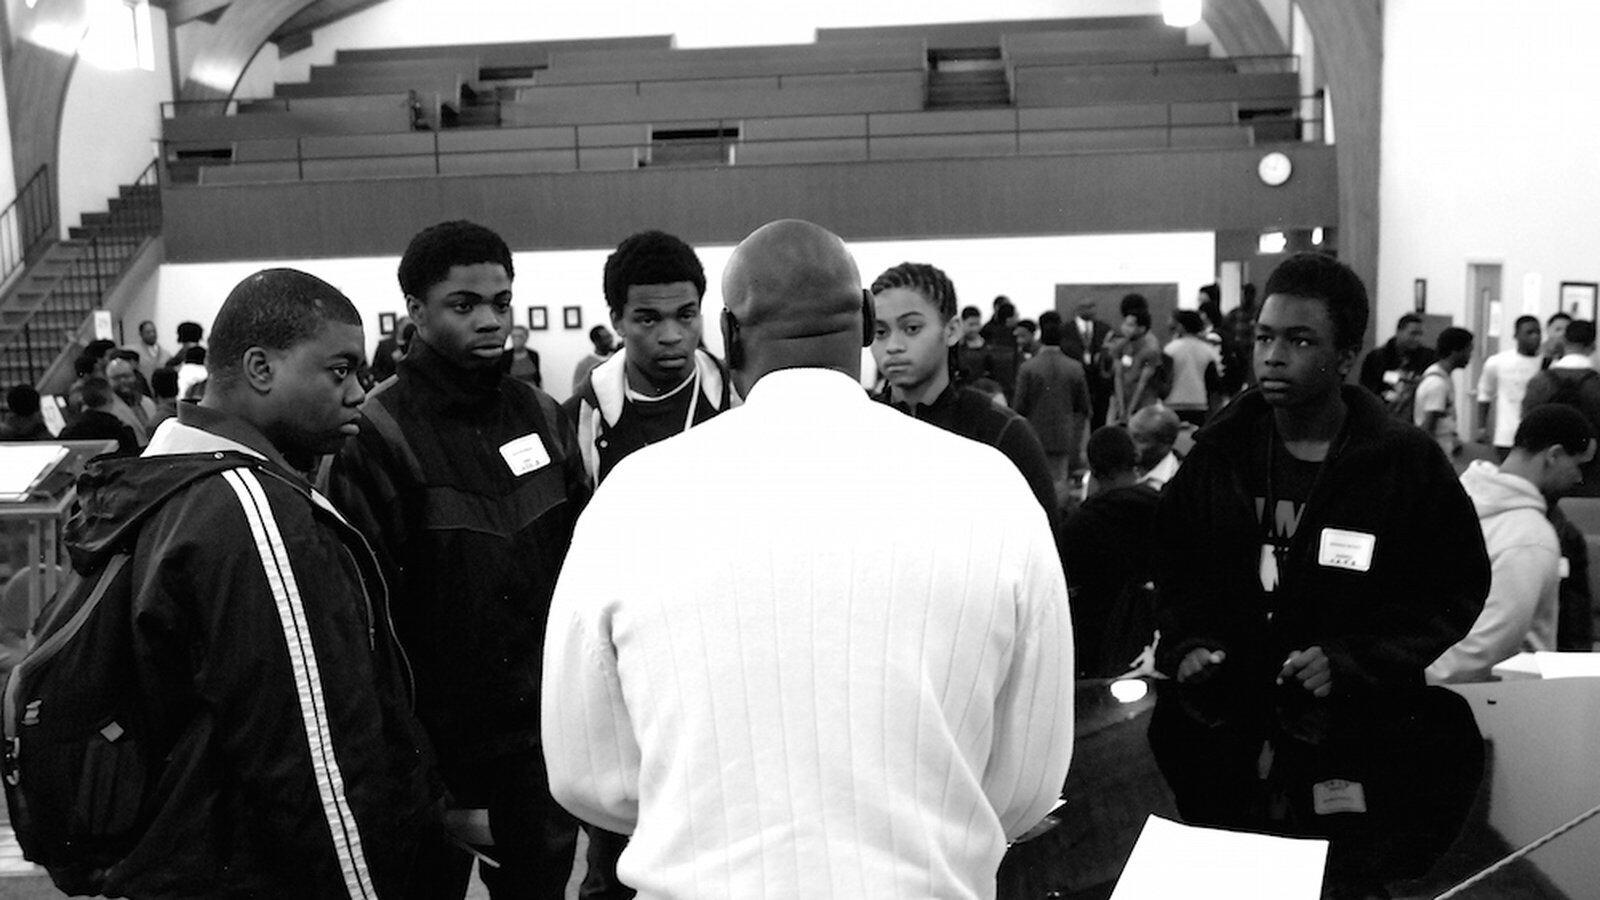 African-American male students from Hinkley High School met with business professionals and discussed race issues Friday at what is expected to be an annual summit for black males.